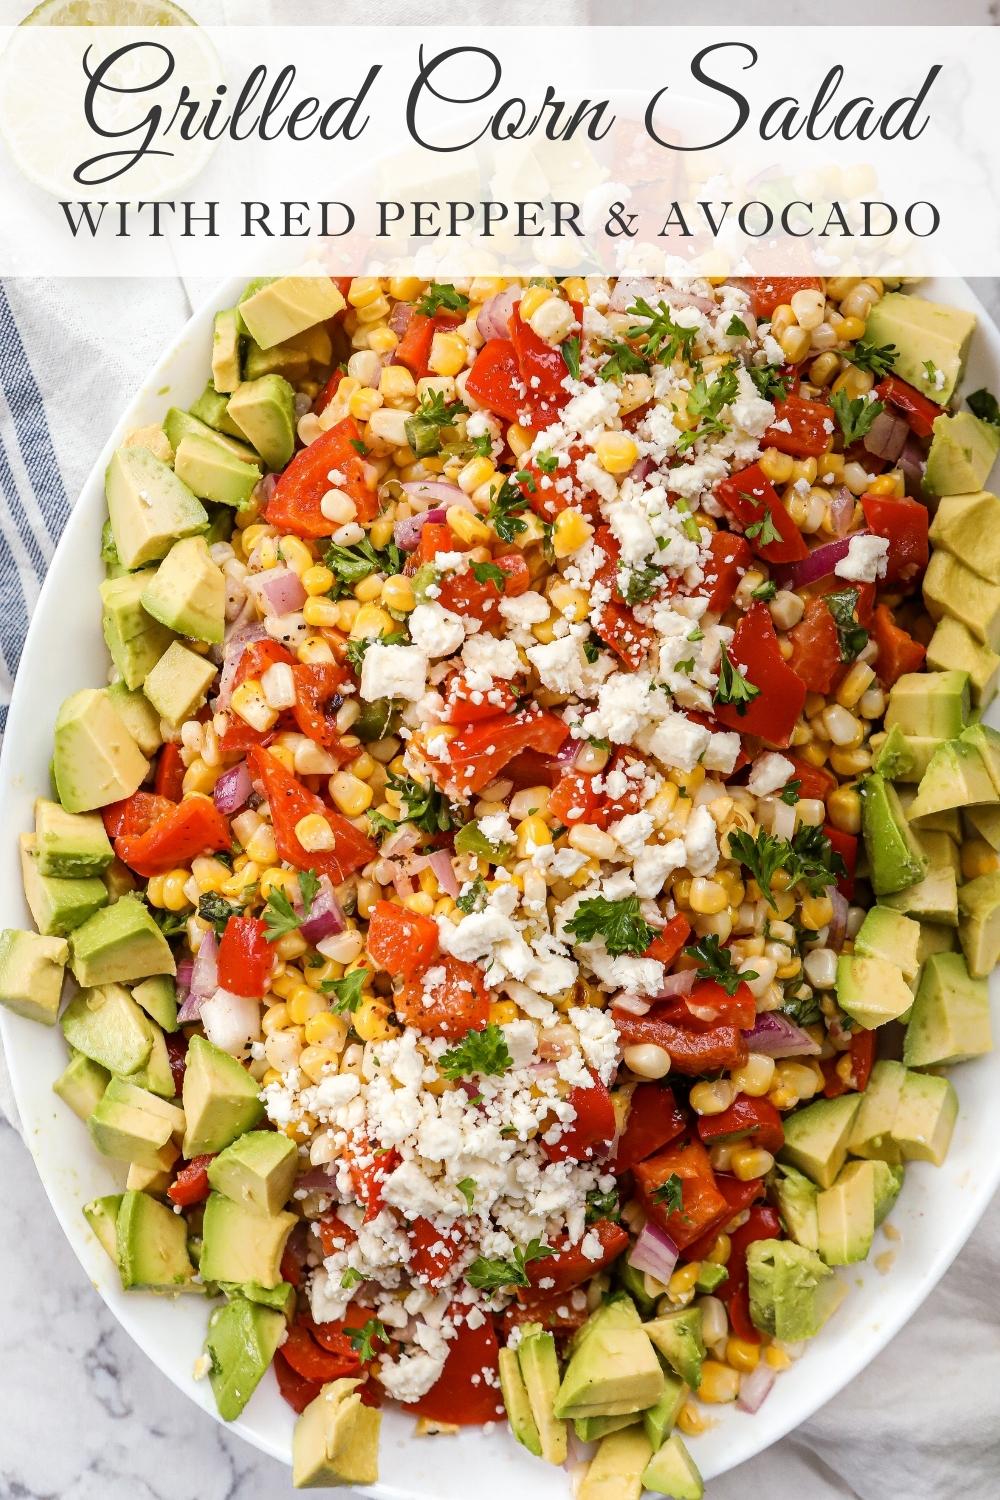 Recipe for Grilled Corn Salad with red pepper and avocado